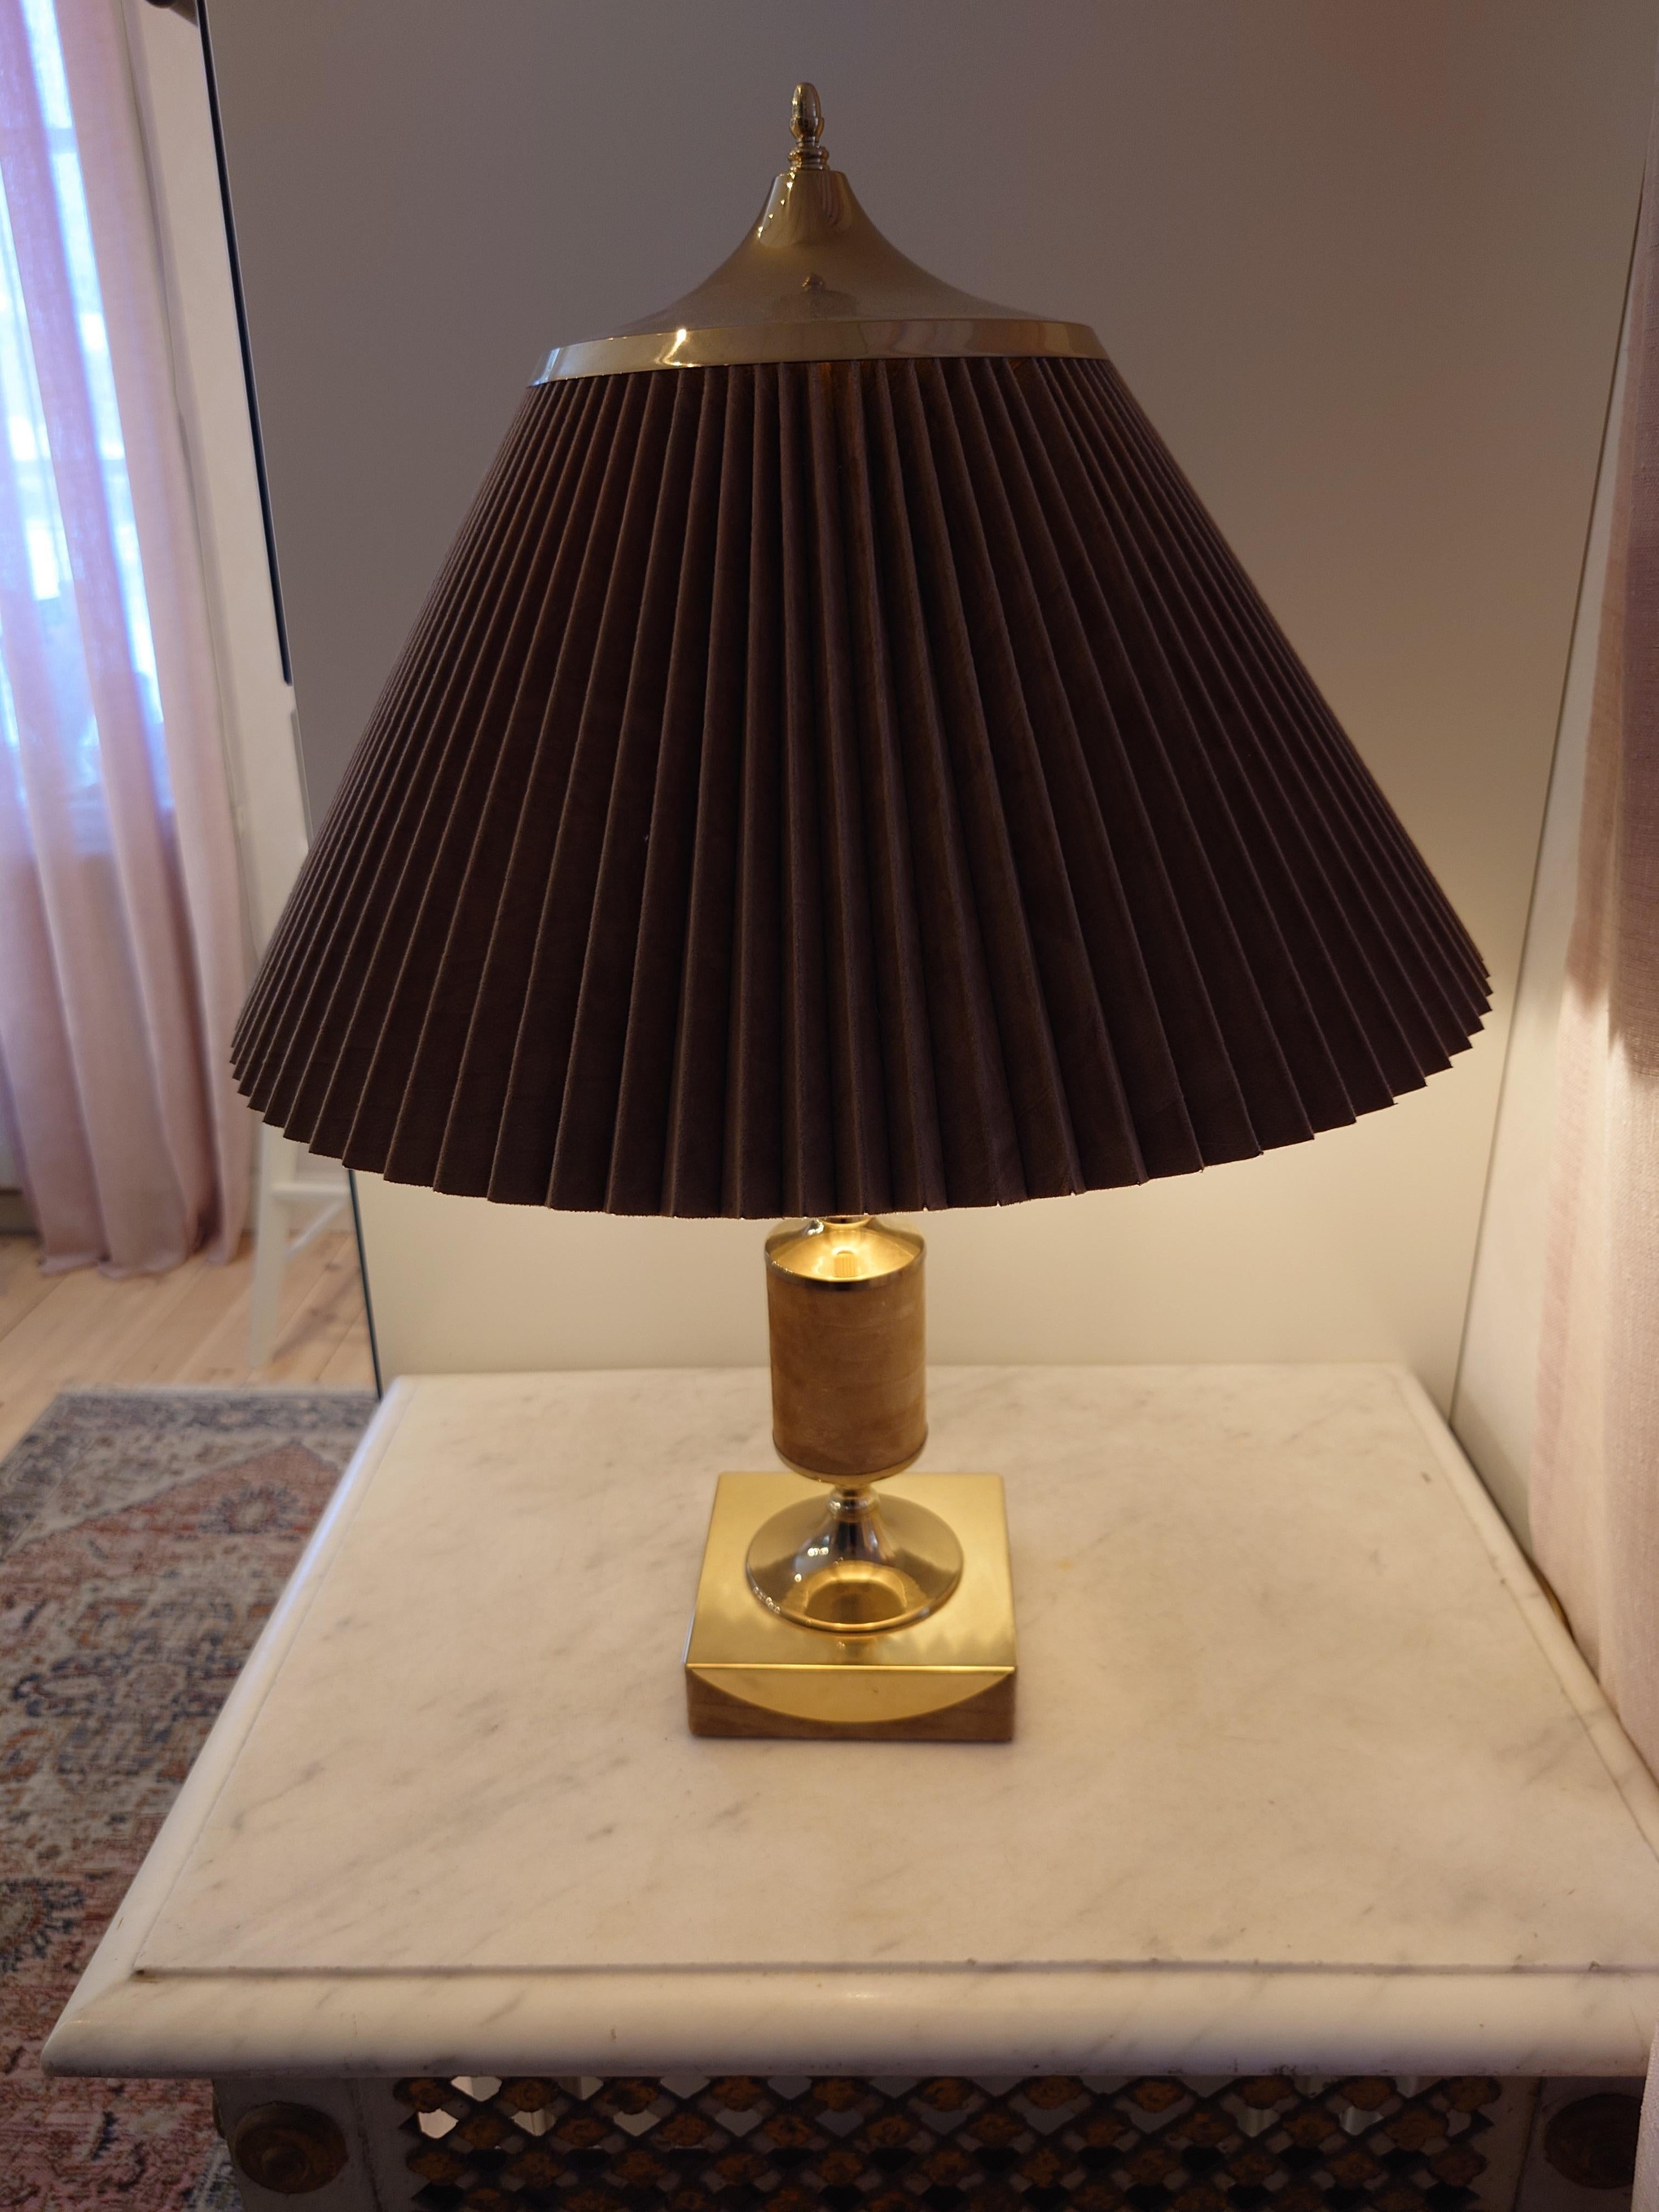 Mid-20th Century  Tr & Co, Table Lamps, Brass, Norway, 1960s For Sale